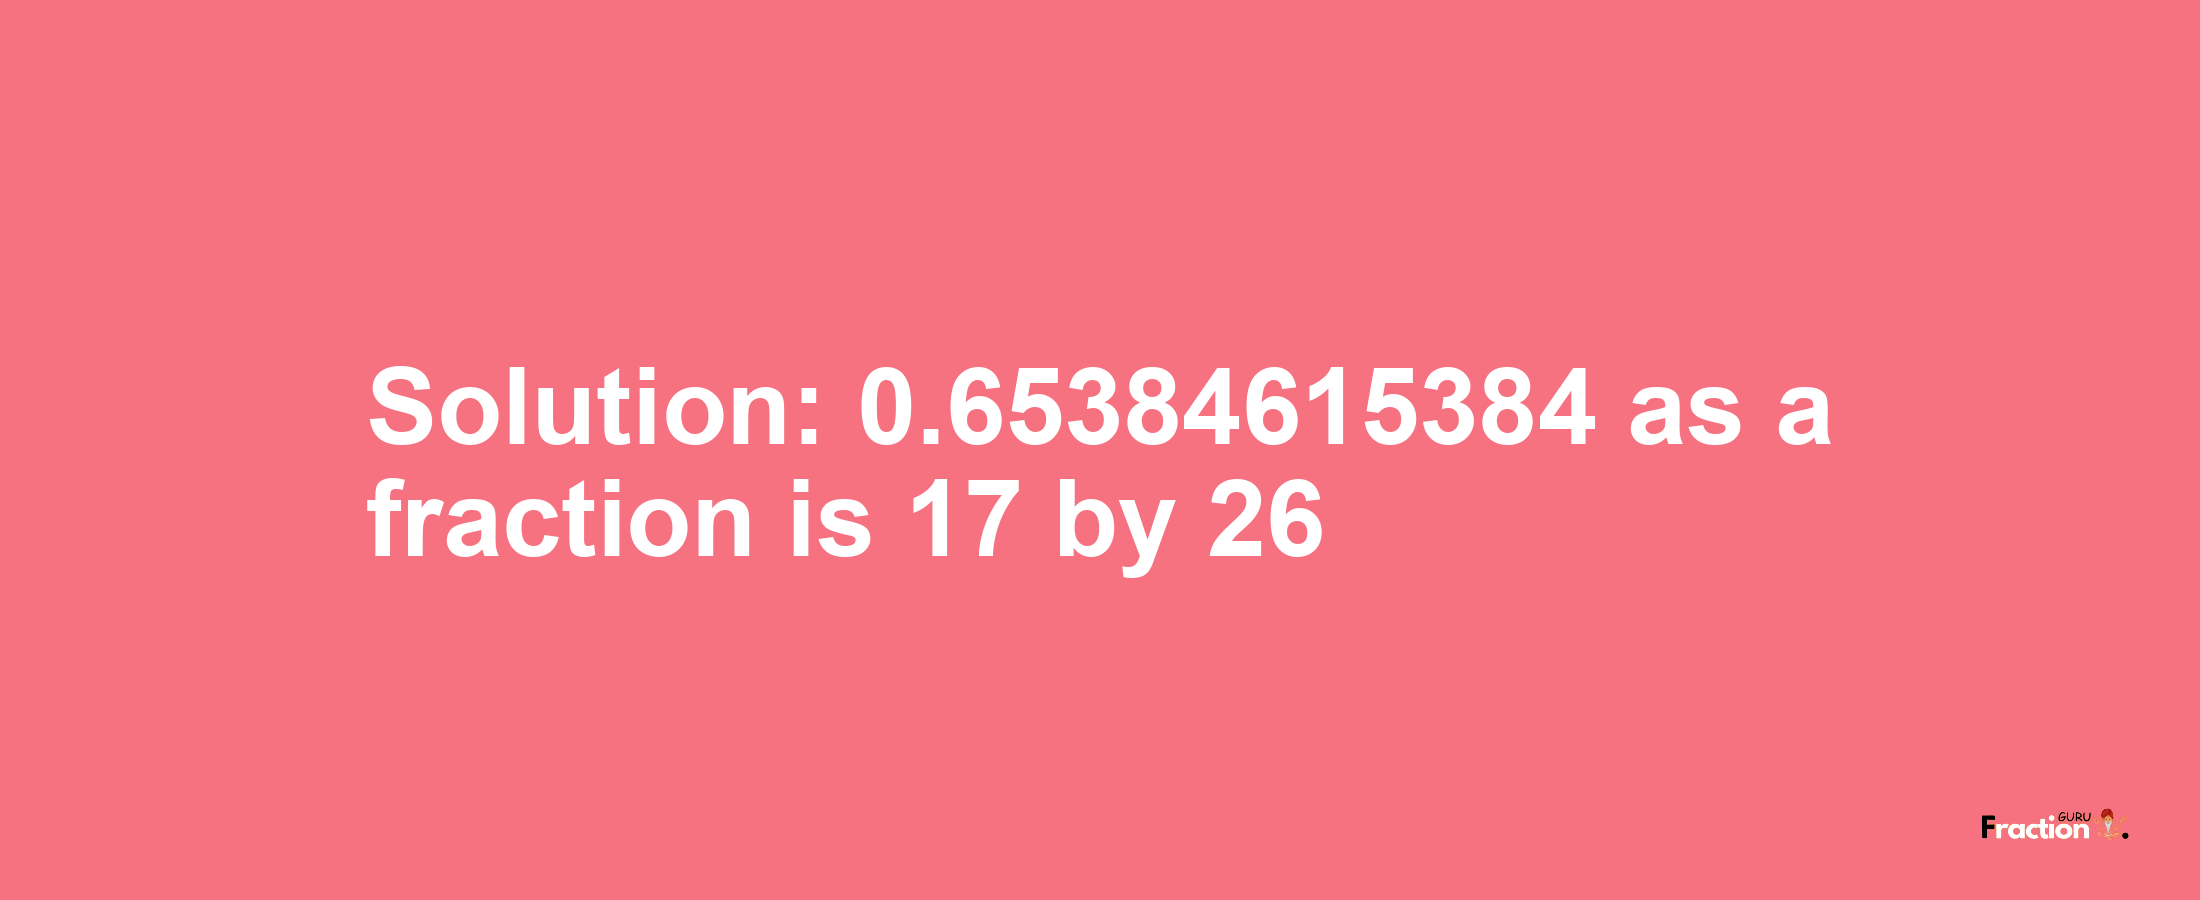 Solution:0.65384615384 as a fraction is 17/26